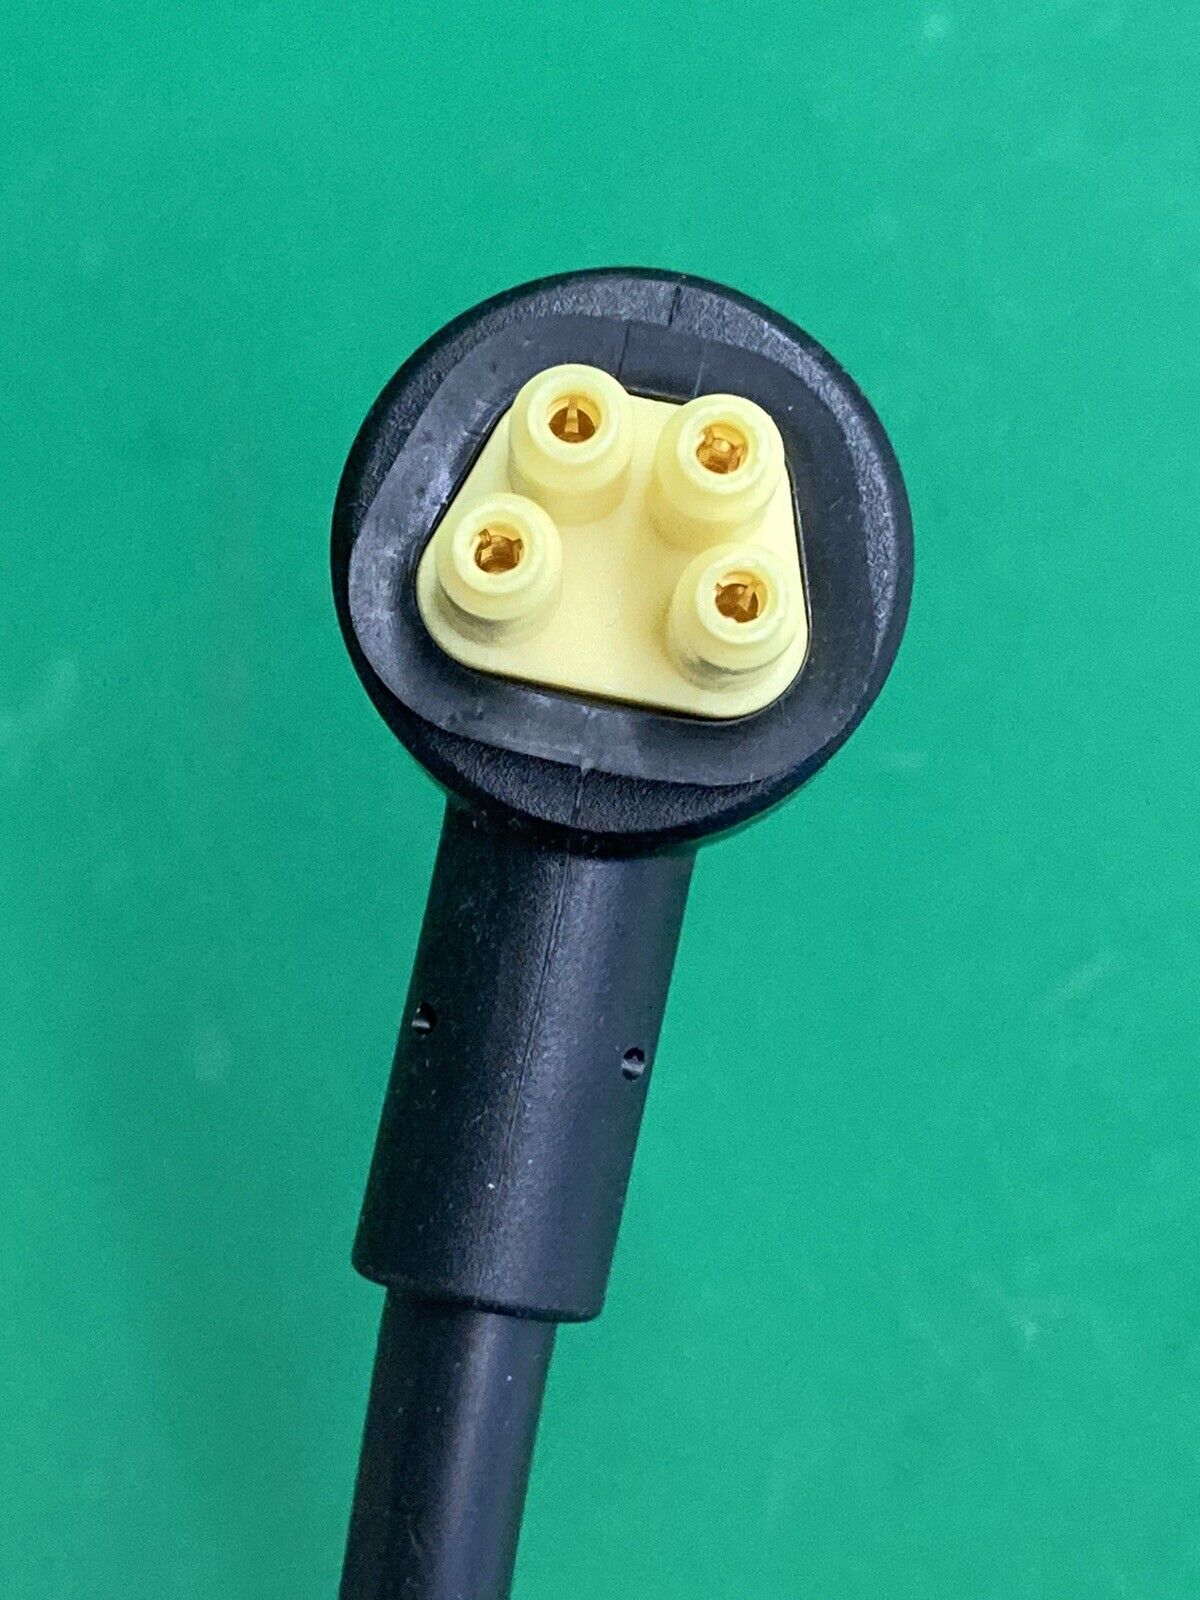 RNET Quickie / Permobil 45" RNET 90° Joystick Cable Plug for Wheelchair #J483